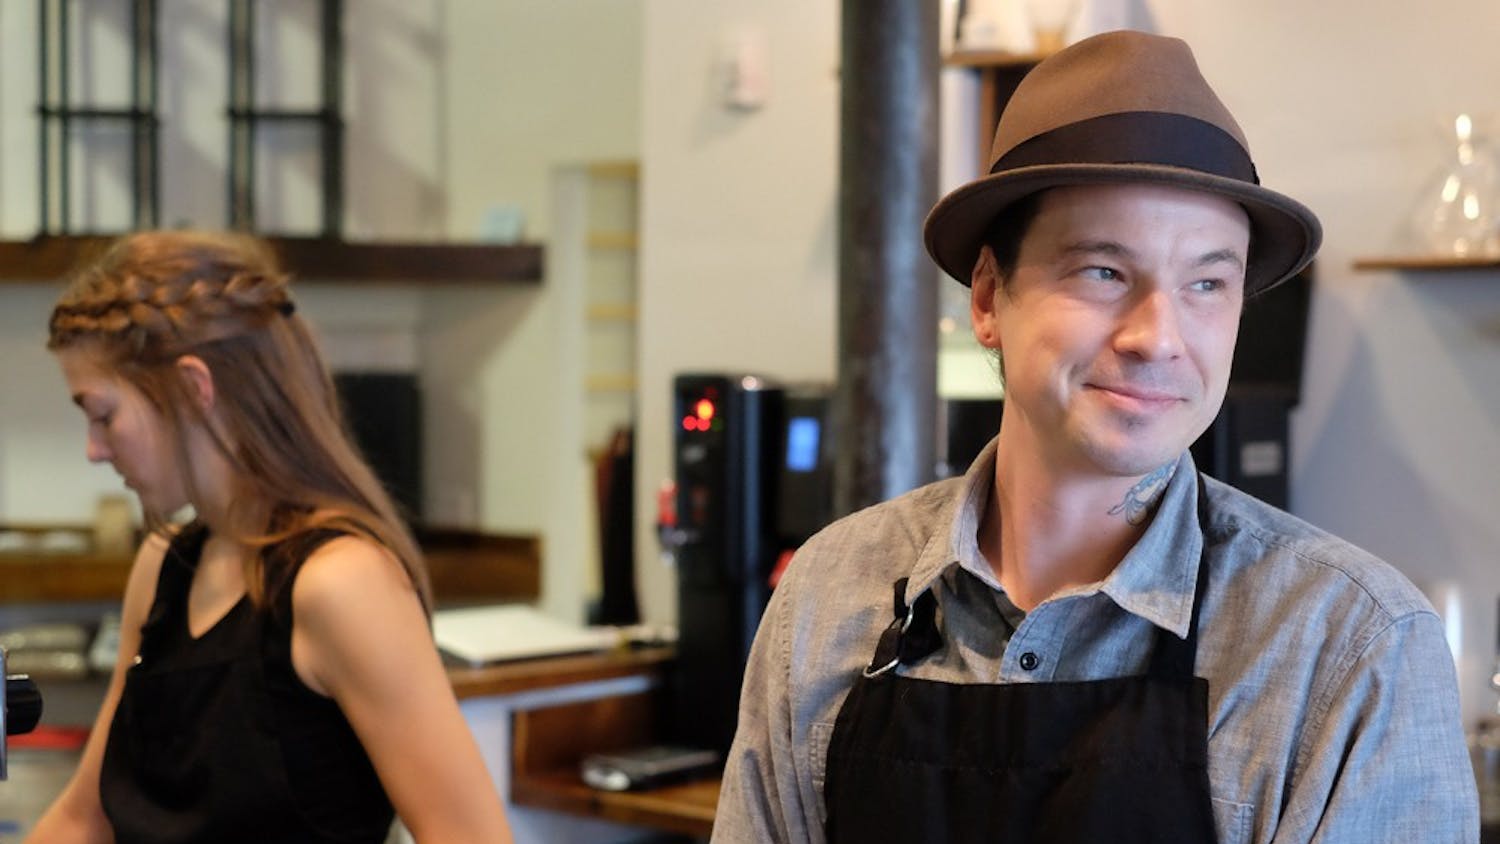 Shaw Sturton works alongside Laura Leech at Grey Squirrel, a new coffee show in Carrboro.